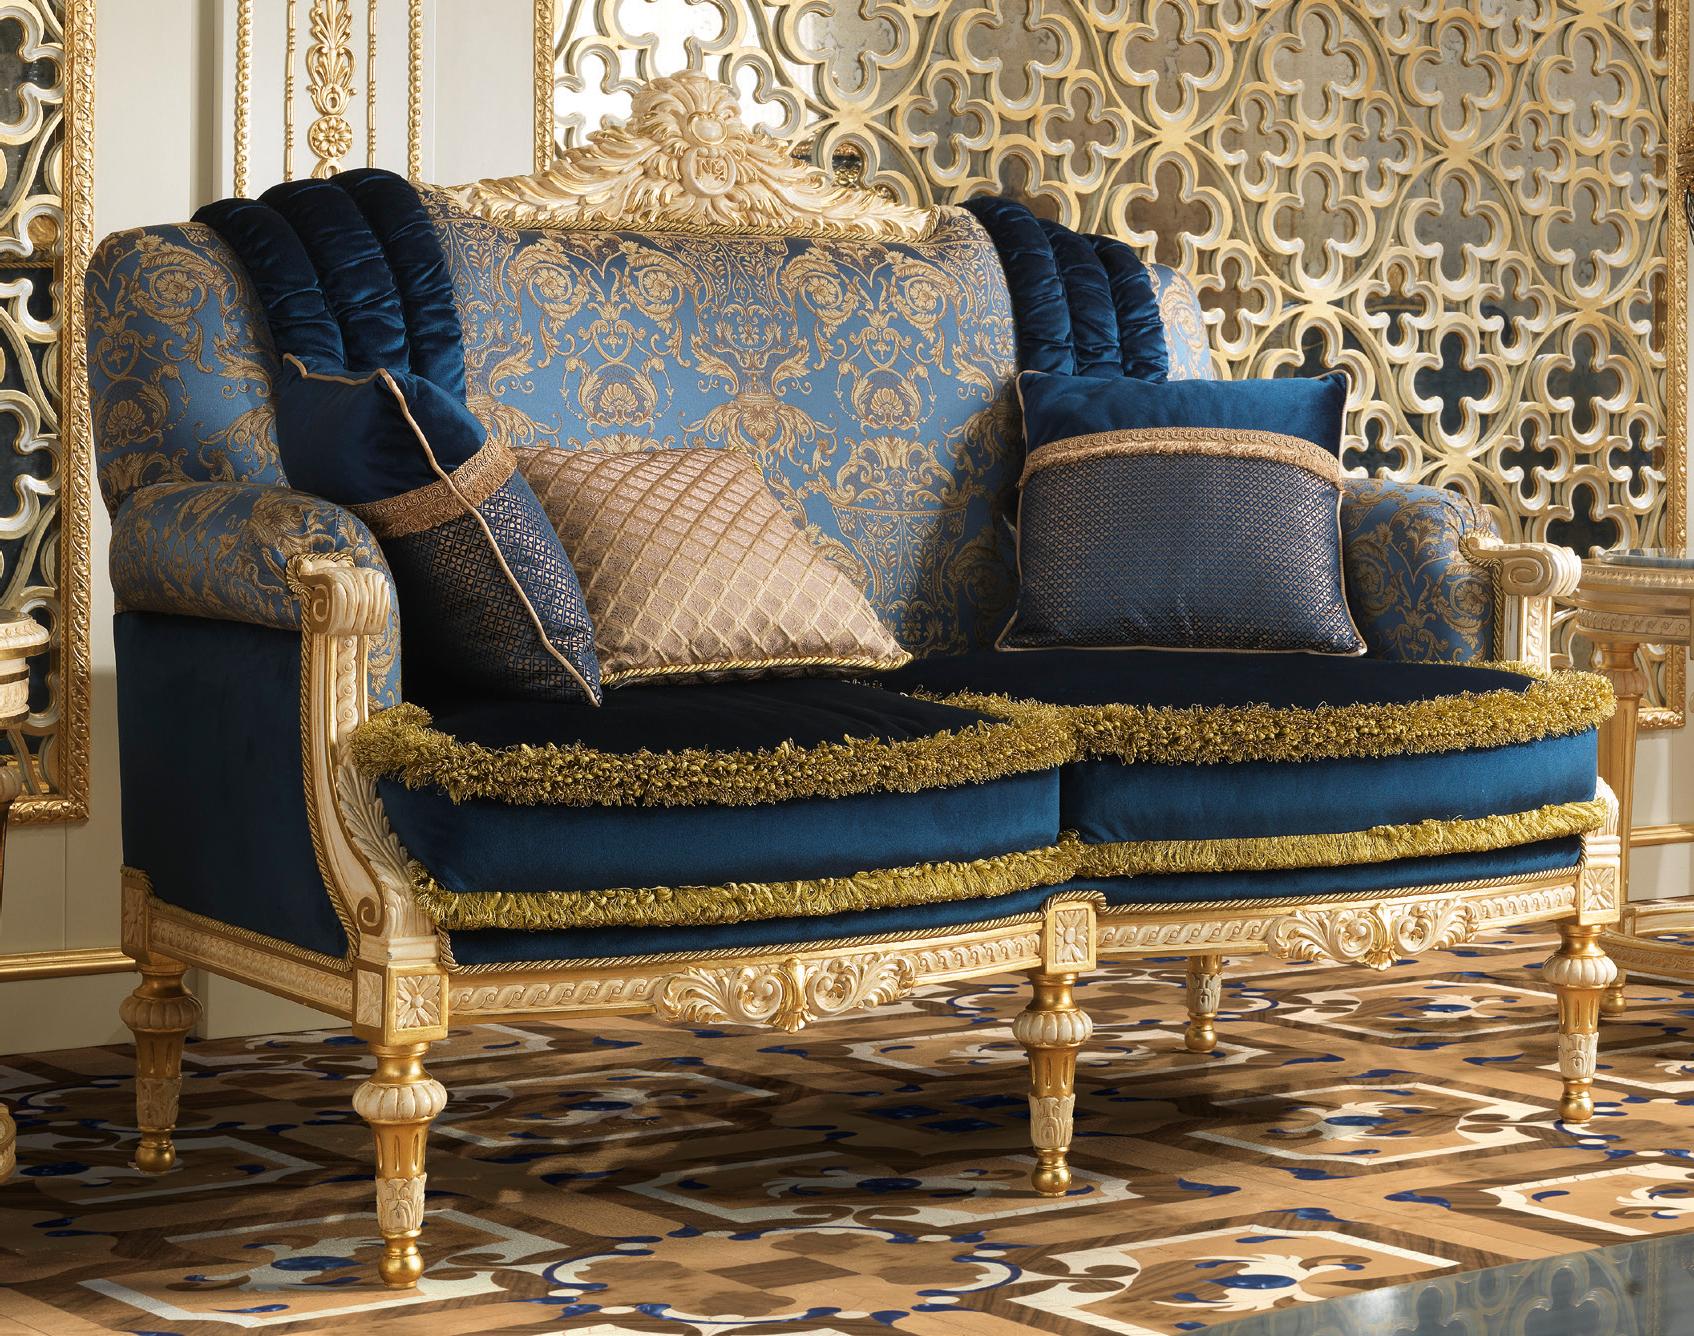 True essence of the artisanal work is shown through this luxurious classic two seater sofa. A highest quality blend of fabric choice and texture, the recreation of luxe indigo - gold tone of the velvet stripes and frill over the beautiful damask